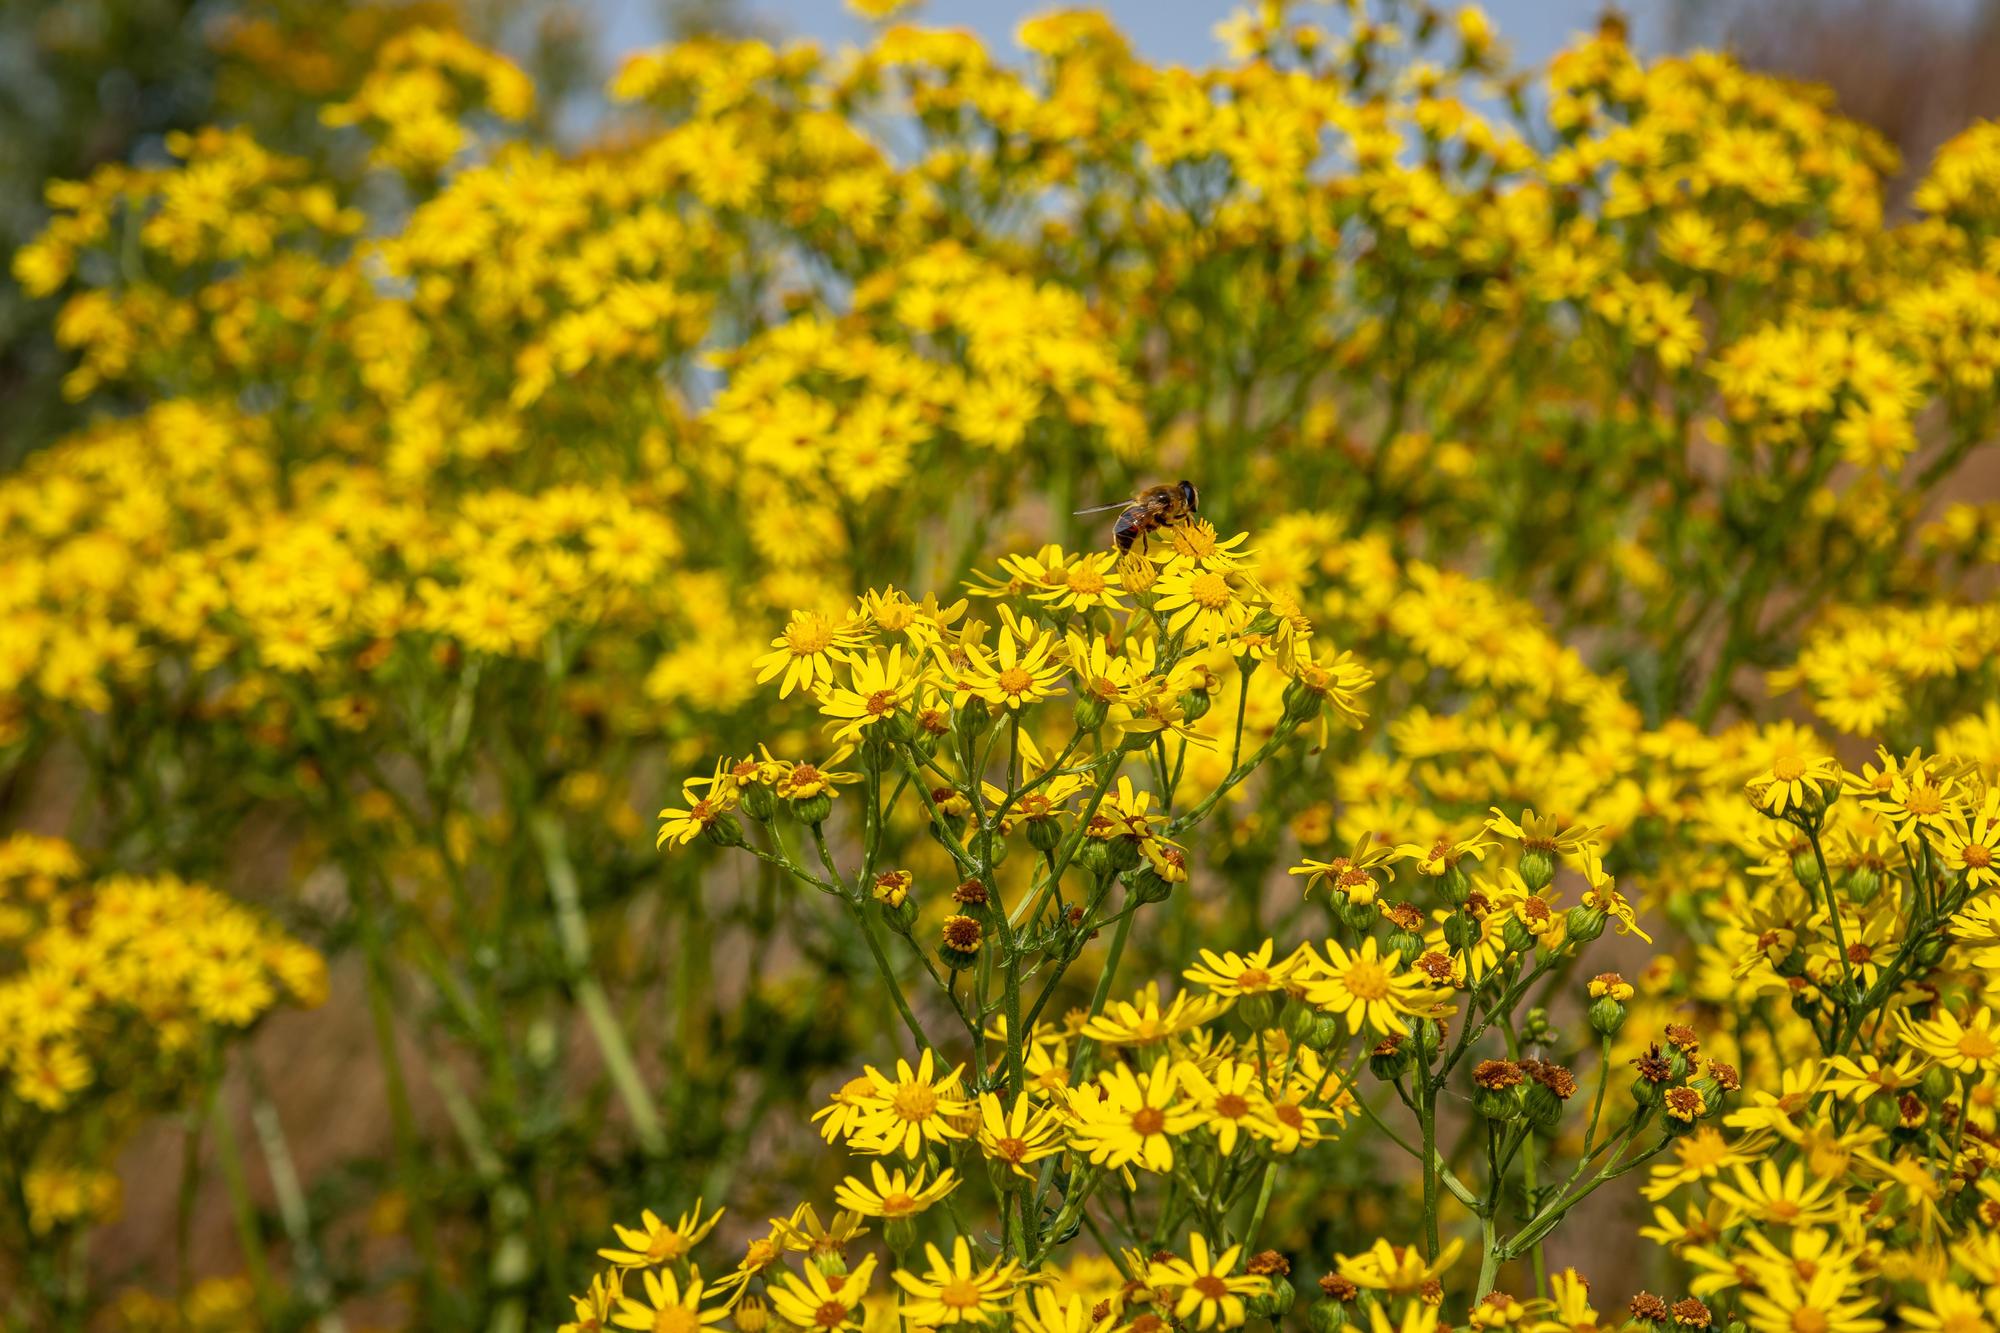 A bee on a cluster of yellow tansy ragwort flowers.